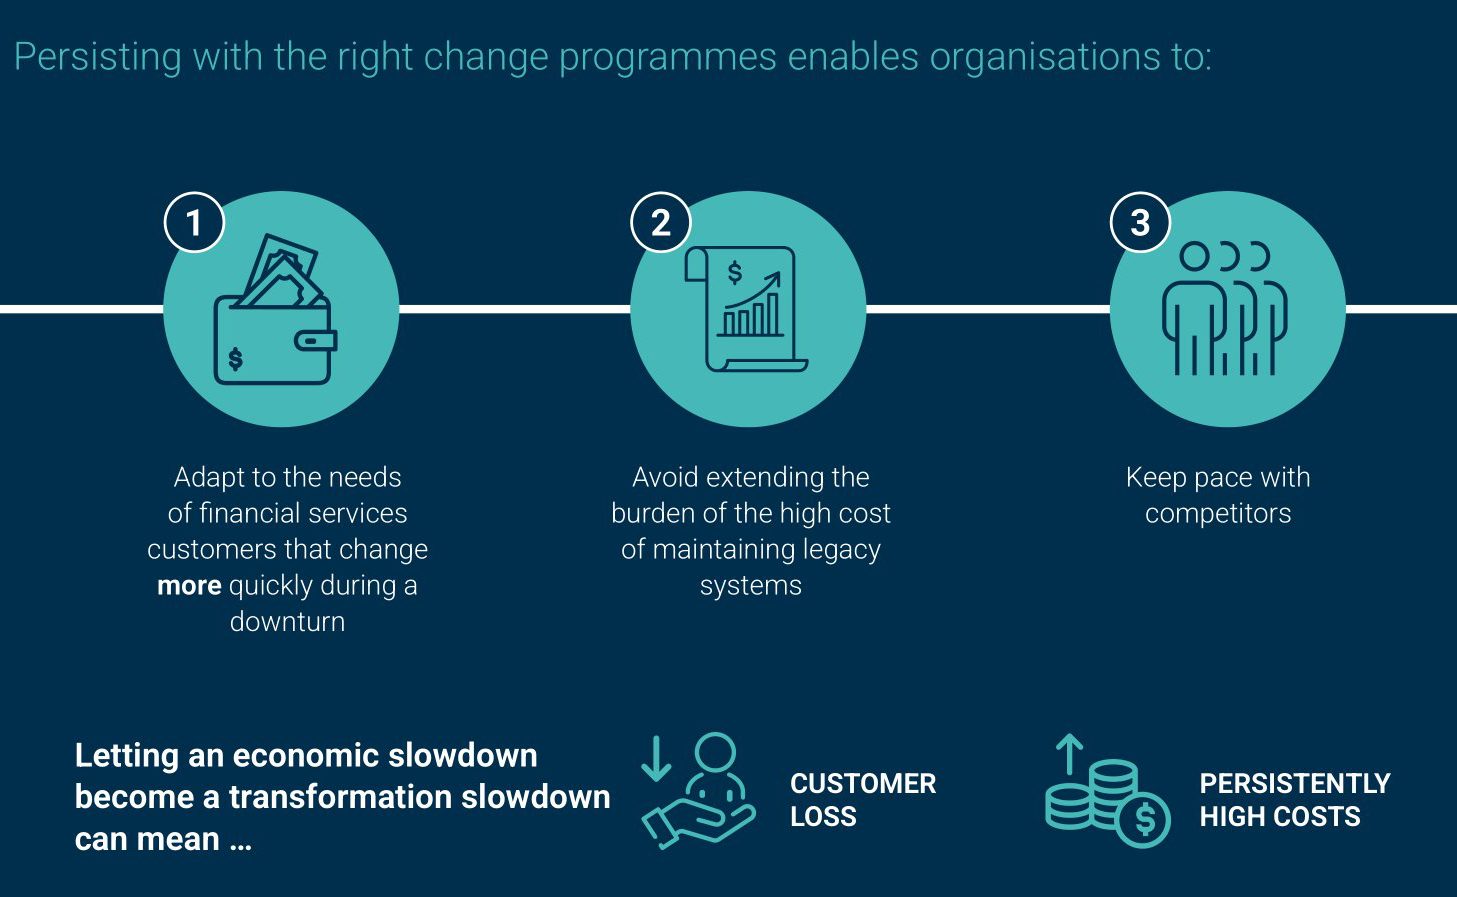 Financial services IT leaders must persist with change programmes 